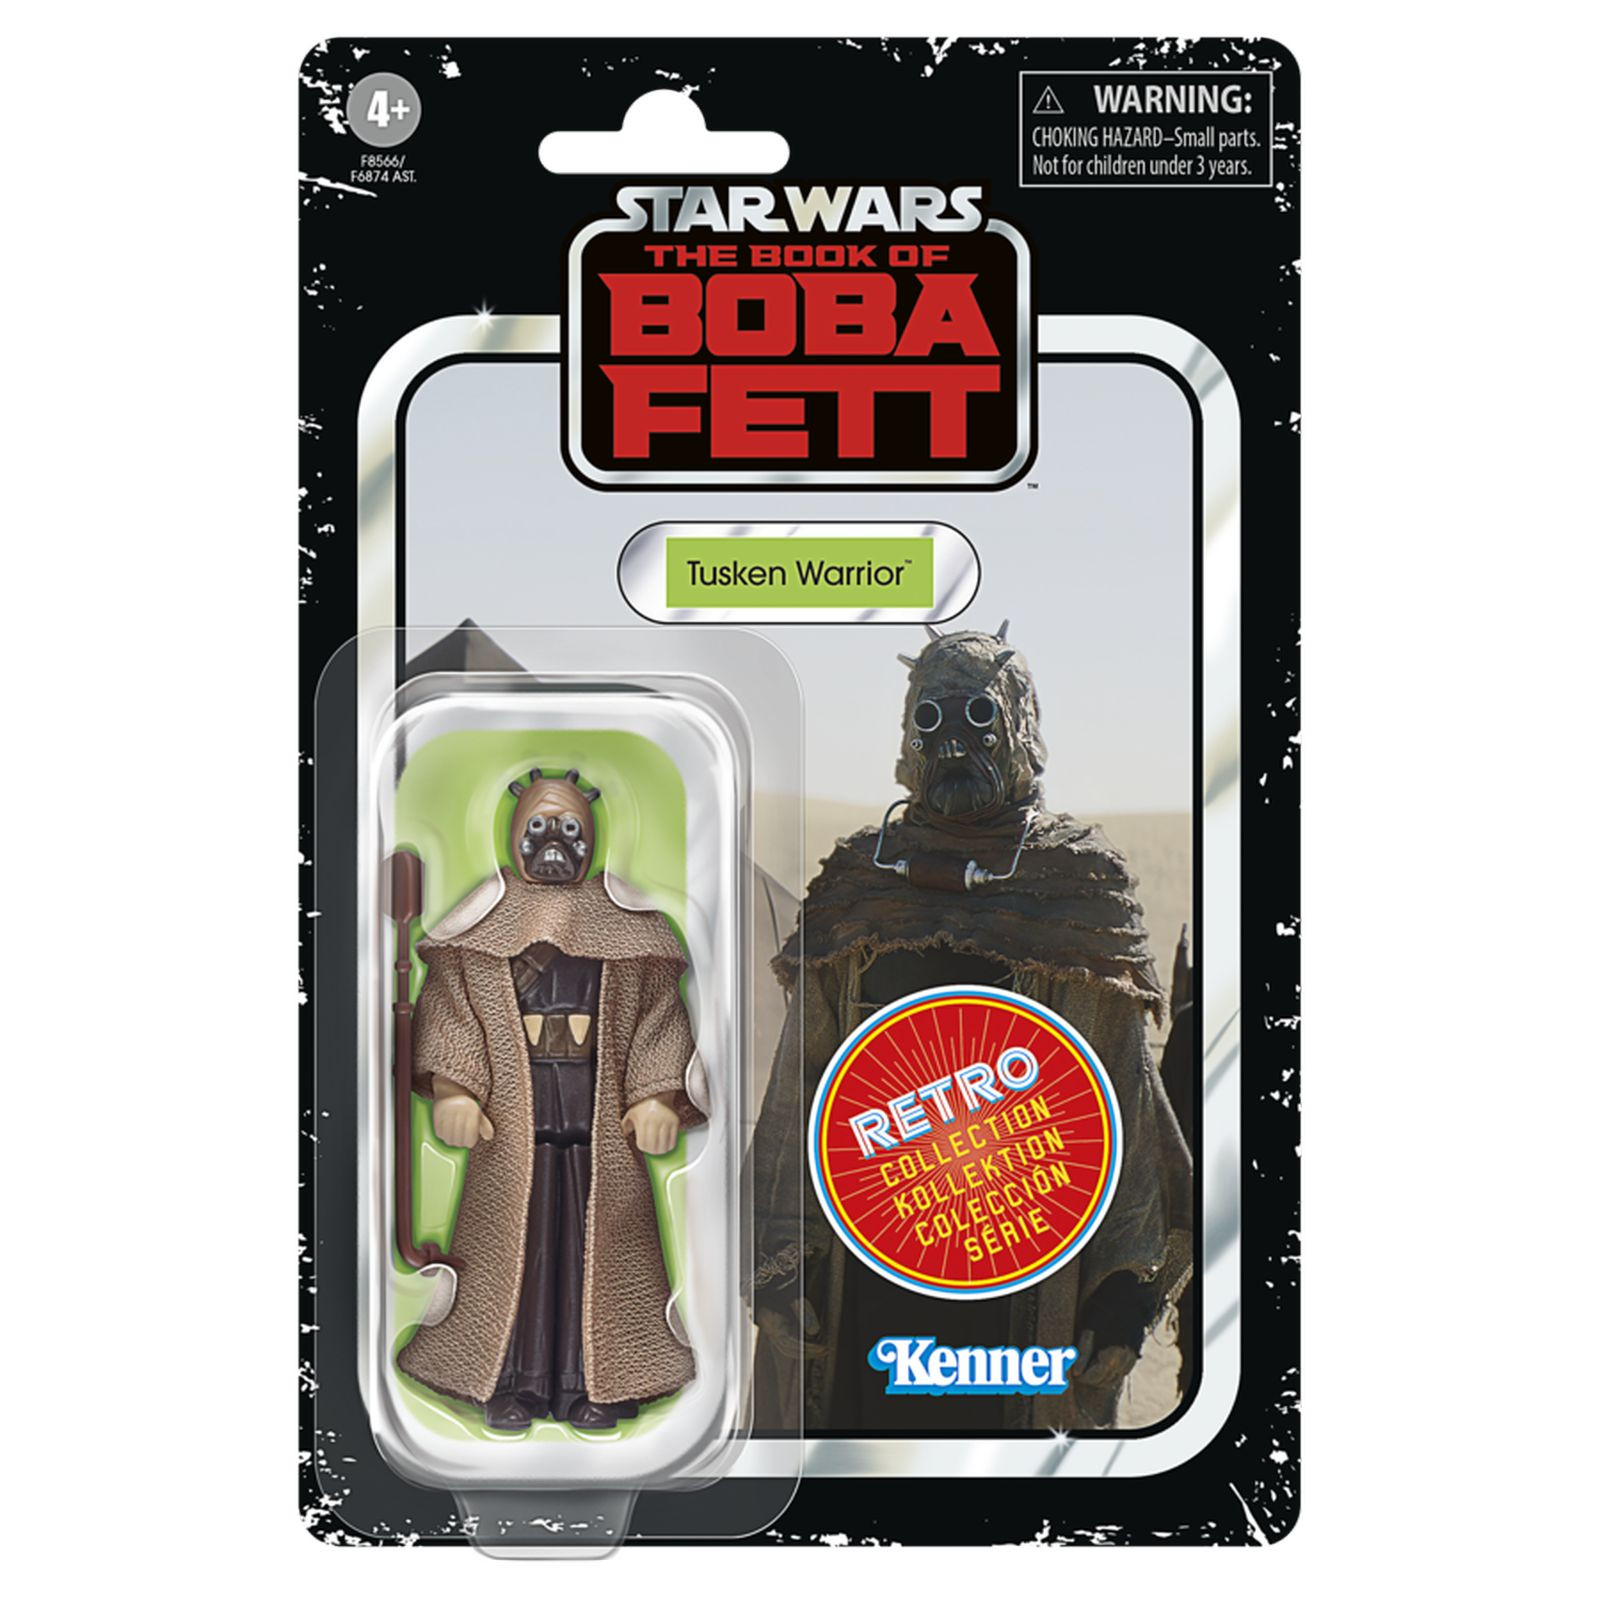 TUSKEN WARRIOR FIG. 9,5 CM STAR WARS: THE BOOK OF BOBA FETT RETRO COLLECTION